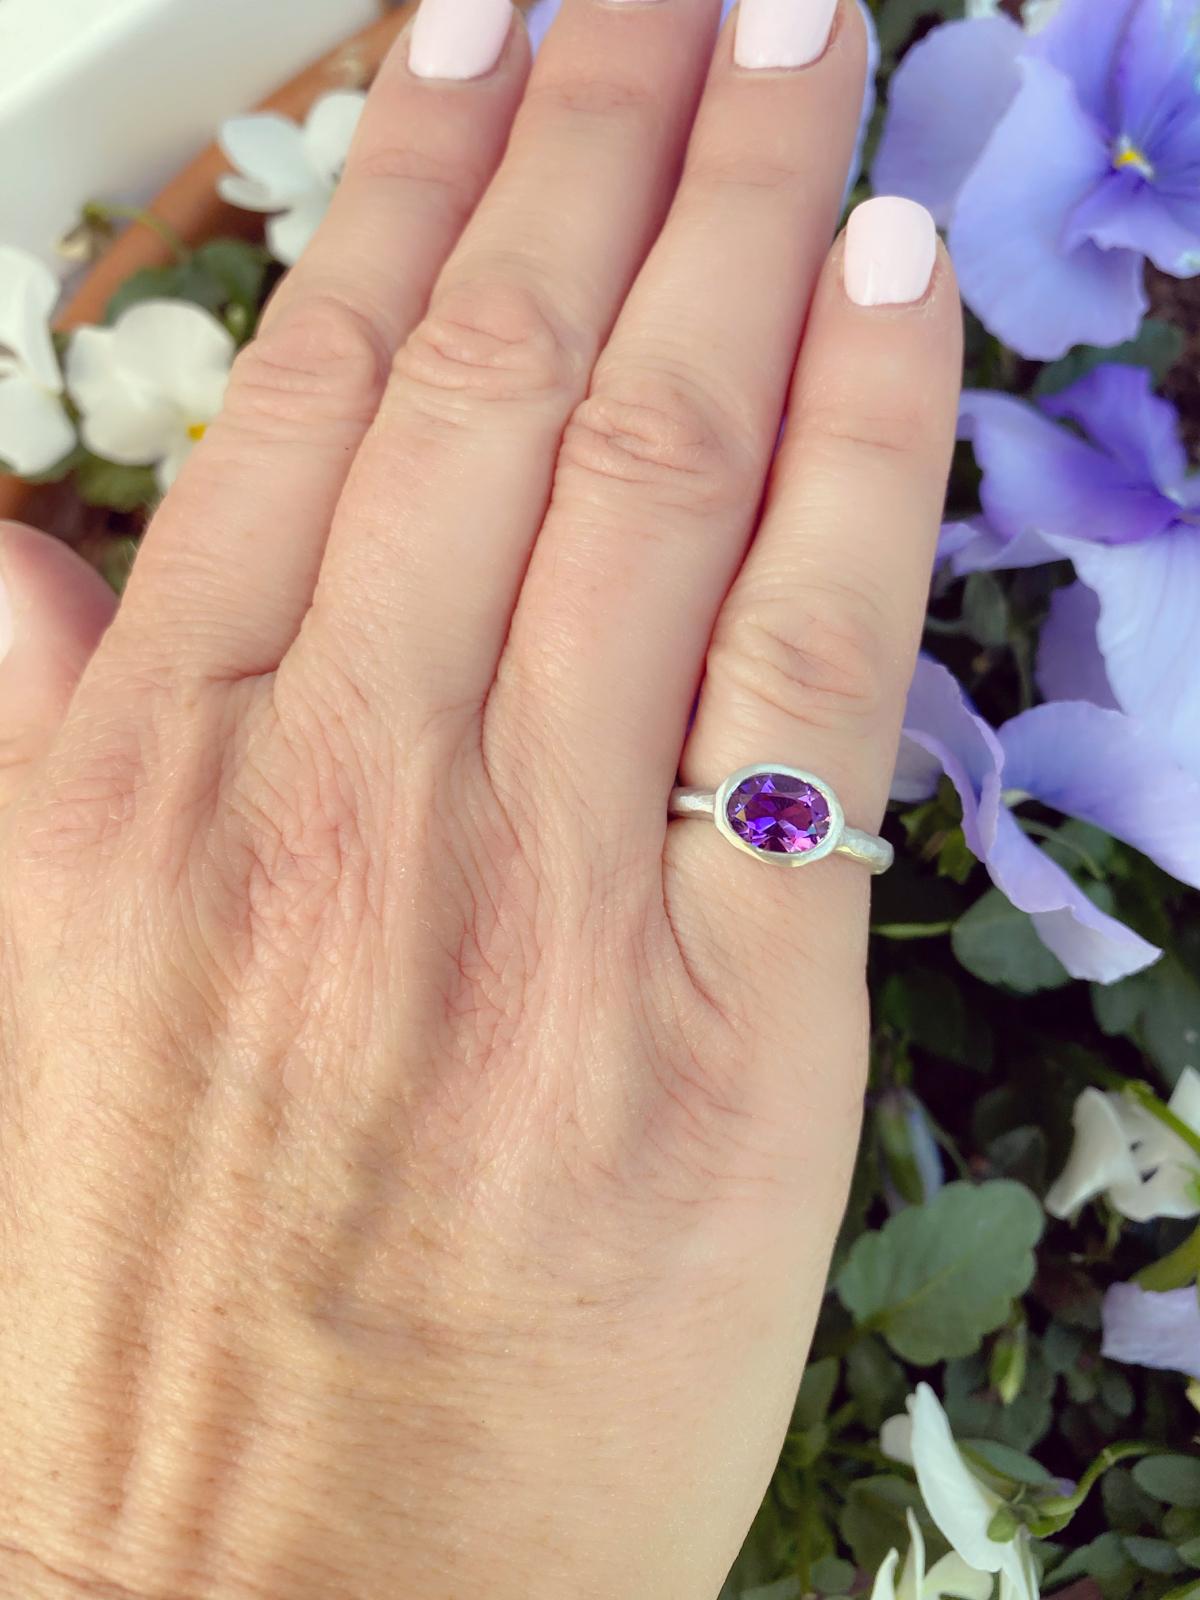 Handmade and custom, this one-of-a-kind ring features an oval-shaped bright purple amethyst weighing 1.04 carats, horizontally bezel-set in a textured, hammered 18k white gold contemporary mount. Showcasing exceptional light return and even color